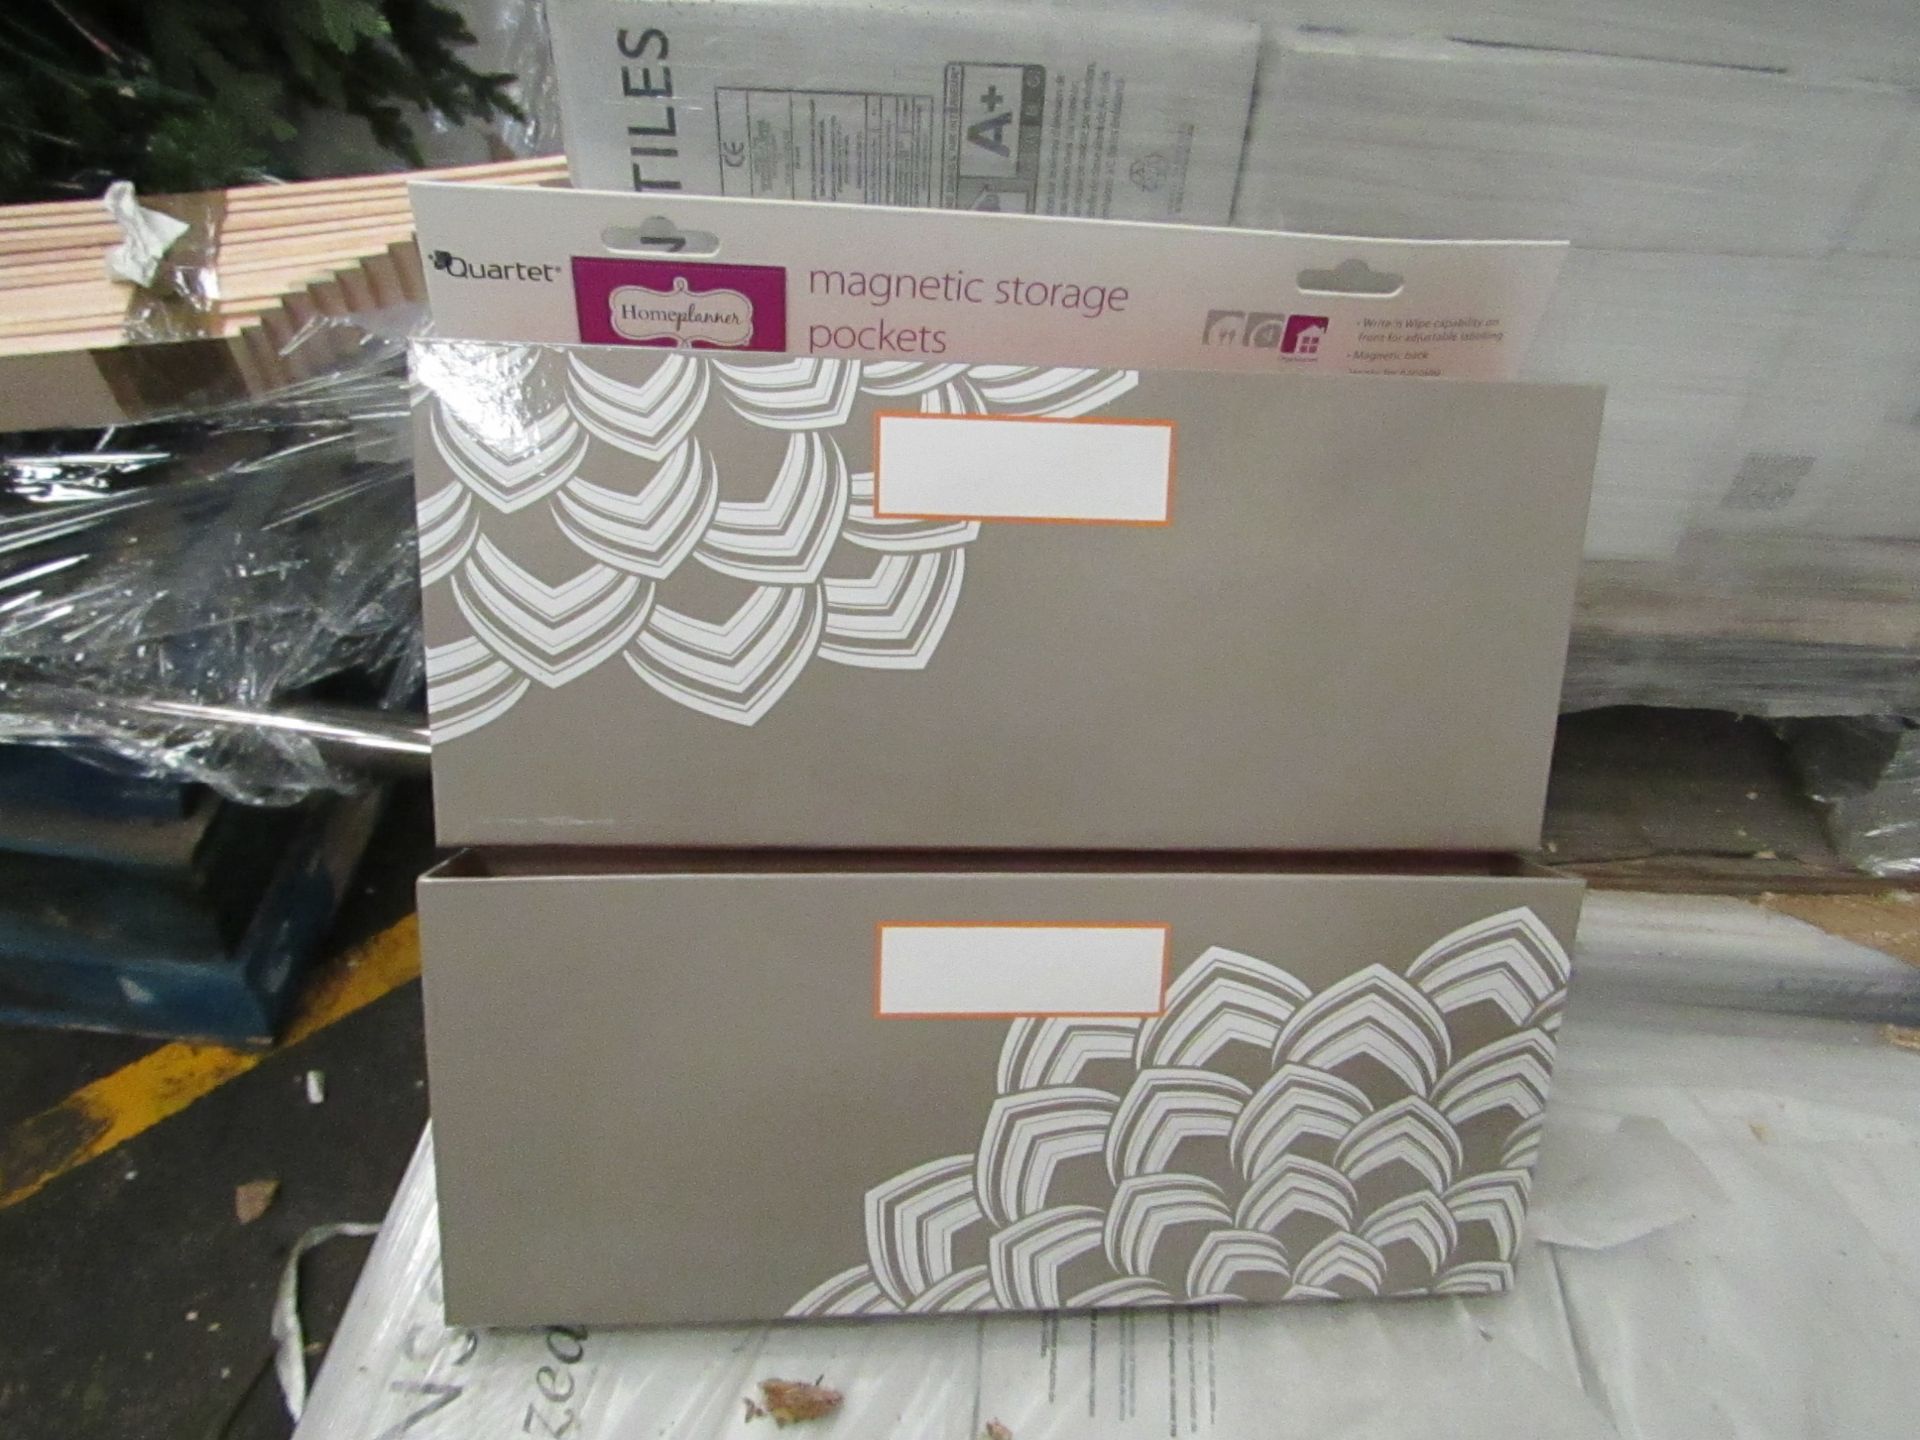 2x Pallets containing a total of approx 200, 2 Pocket Magnetic home document organizers, new.